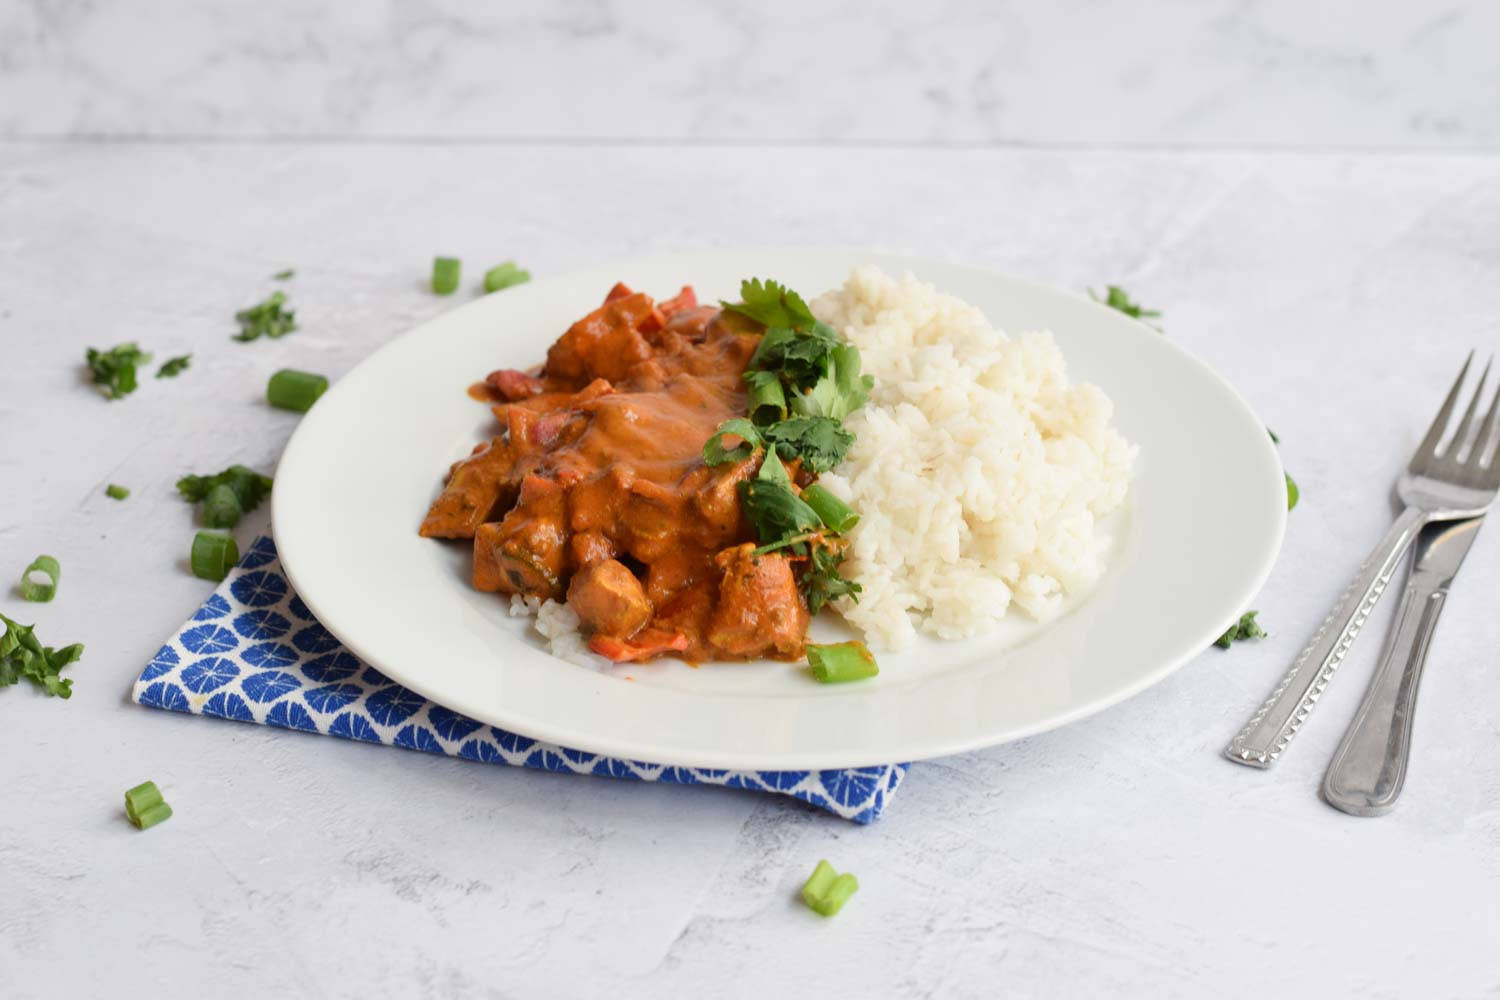 Low FODMAP chicken tikka masala with rice on a plate with cutlery next to it